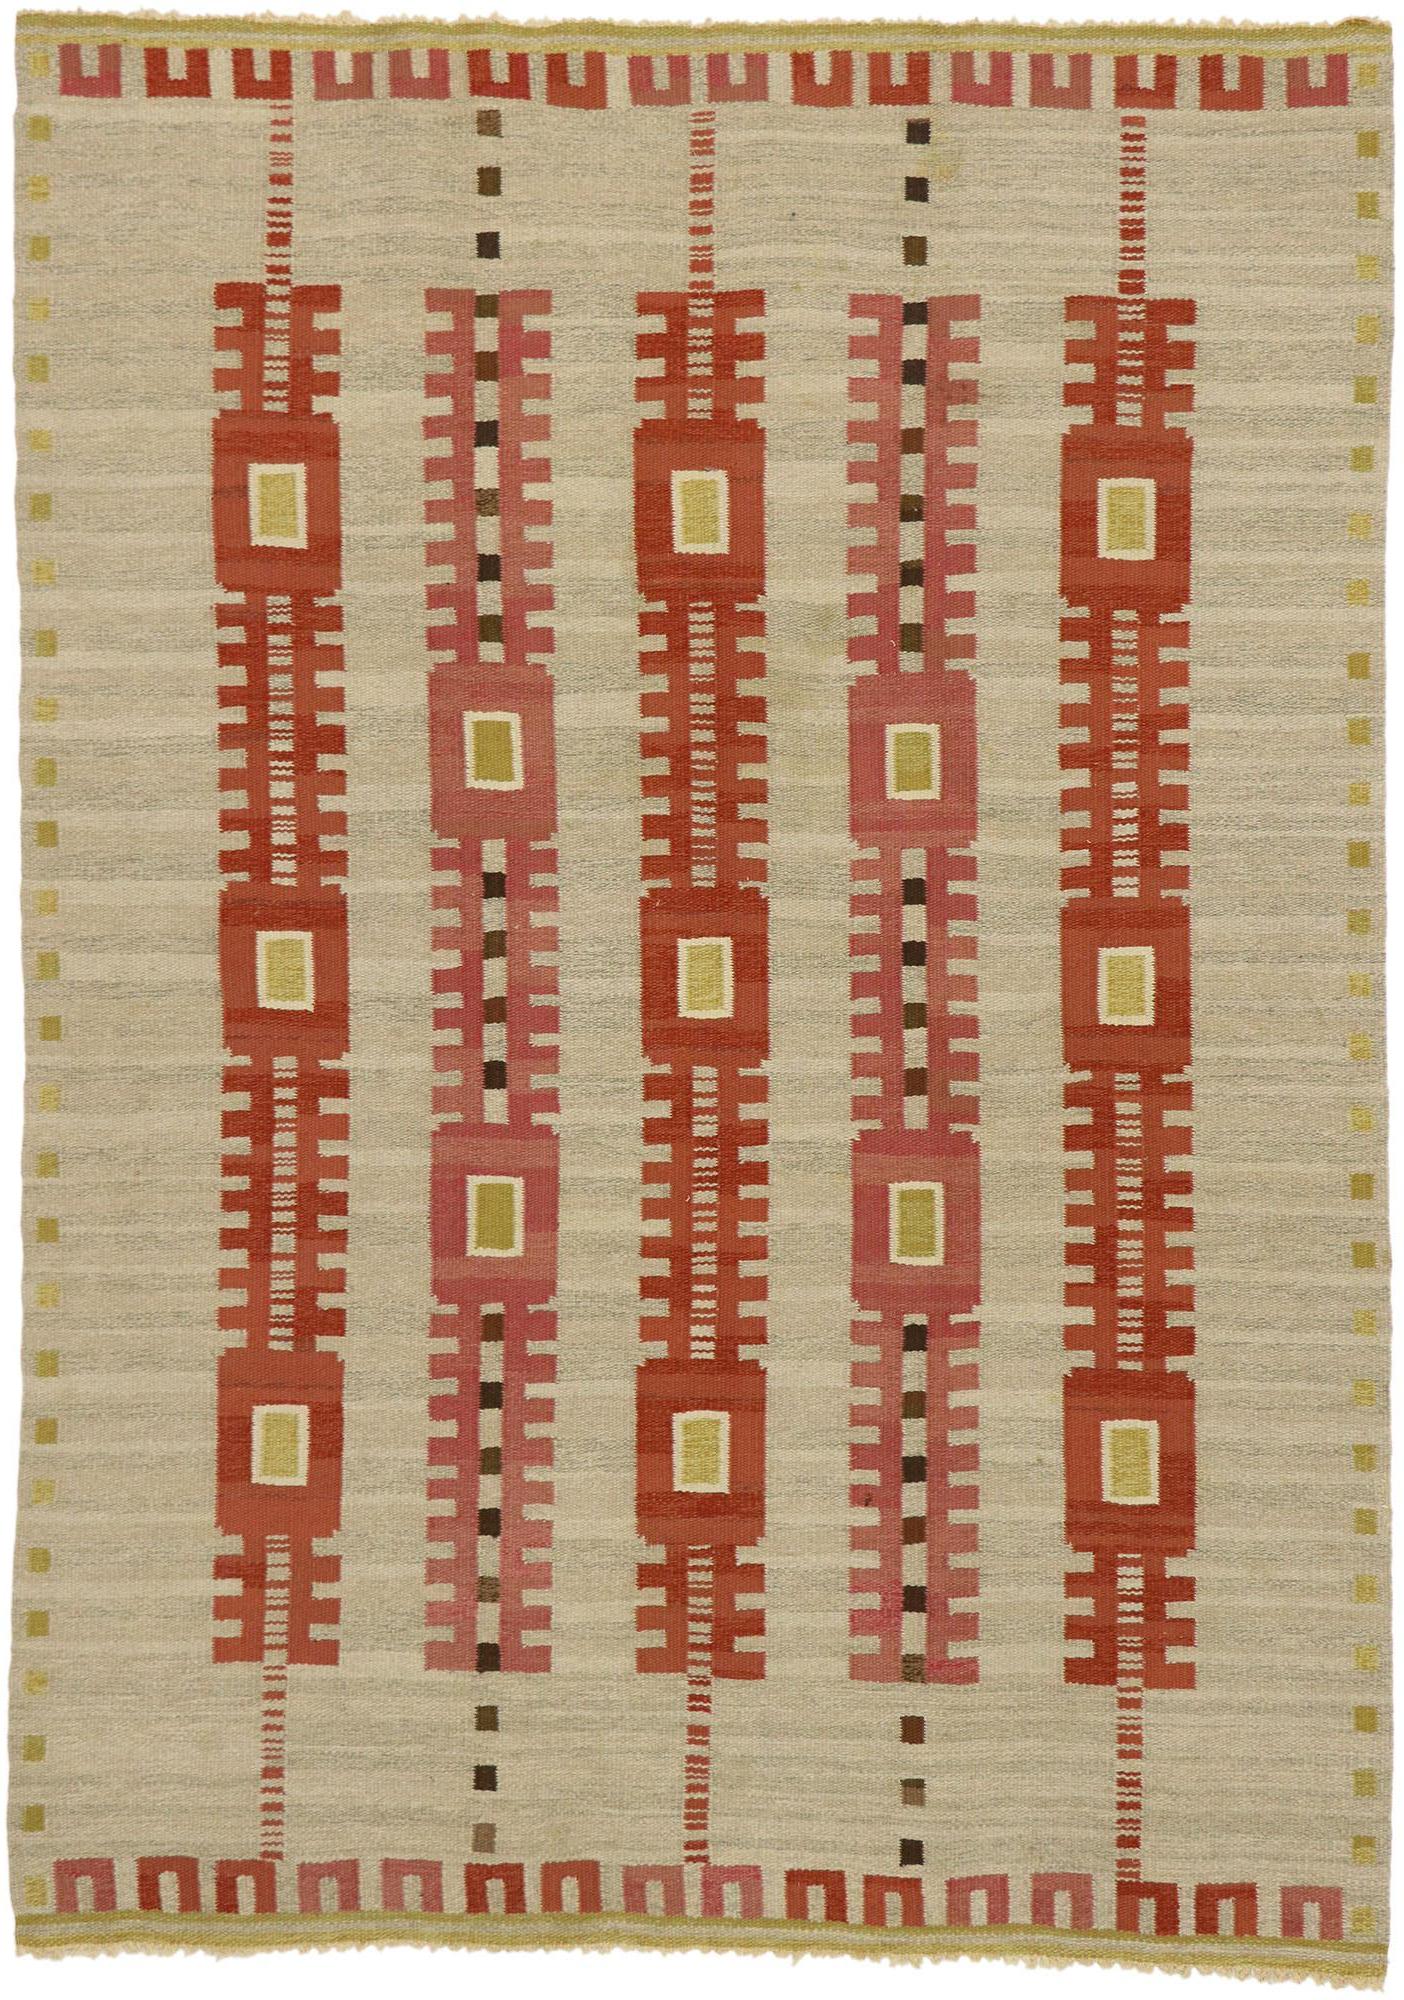 77038 Vintage Swedish Kilim Röllakan Rug with Scandinavian Modern Style, Flatweave Rug. With its geometric design and hygge vibes, this hand-woven wool vintage Swedish Kilim rug beautifully embodies the simplicity of Scandinavian modern style. It